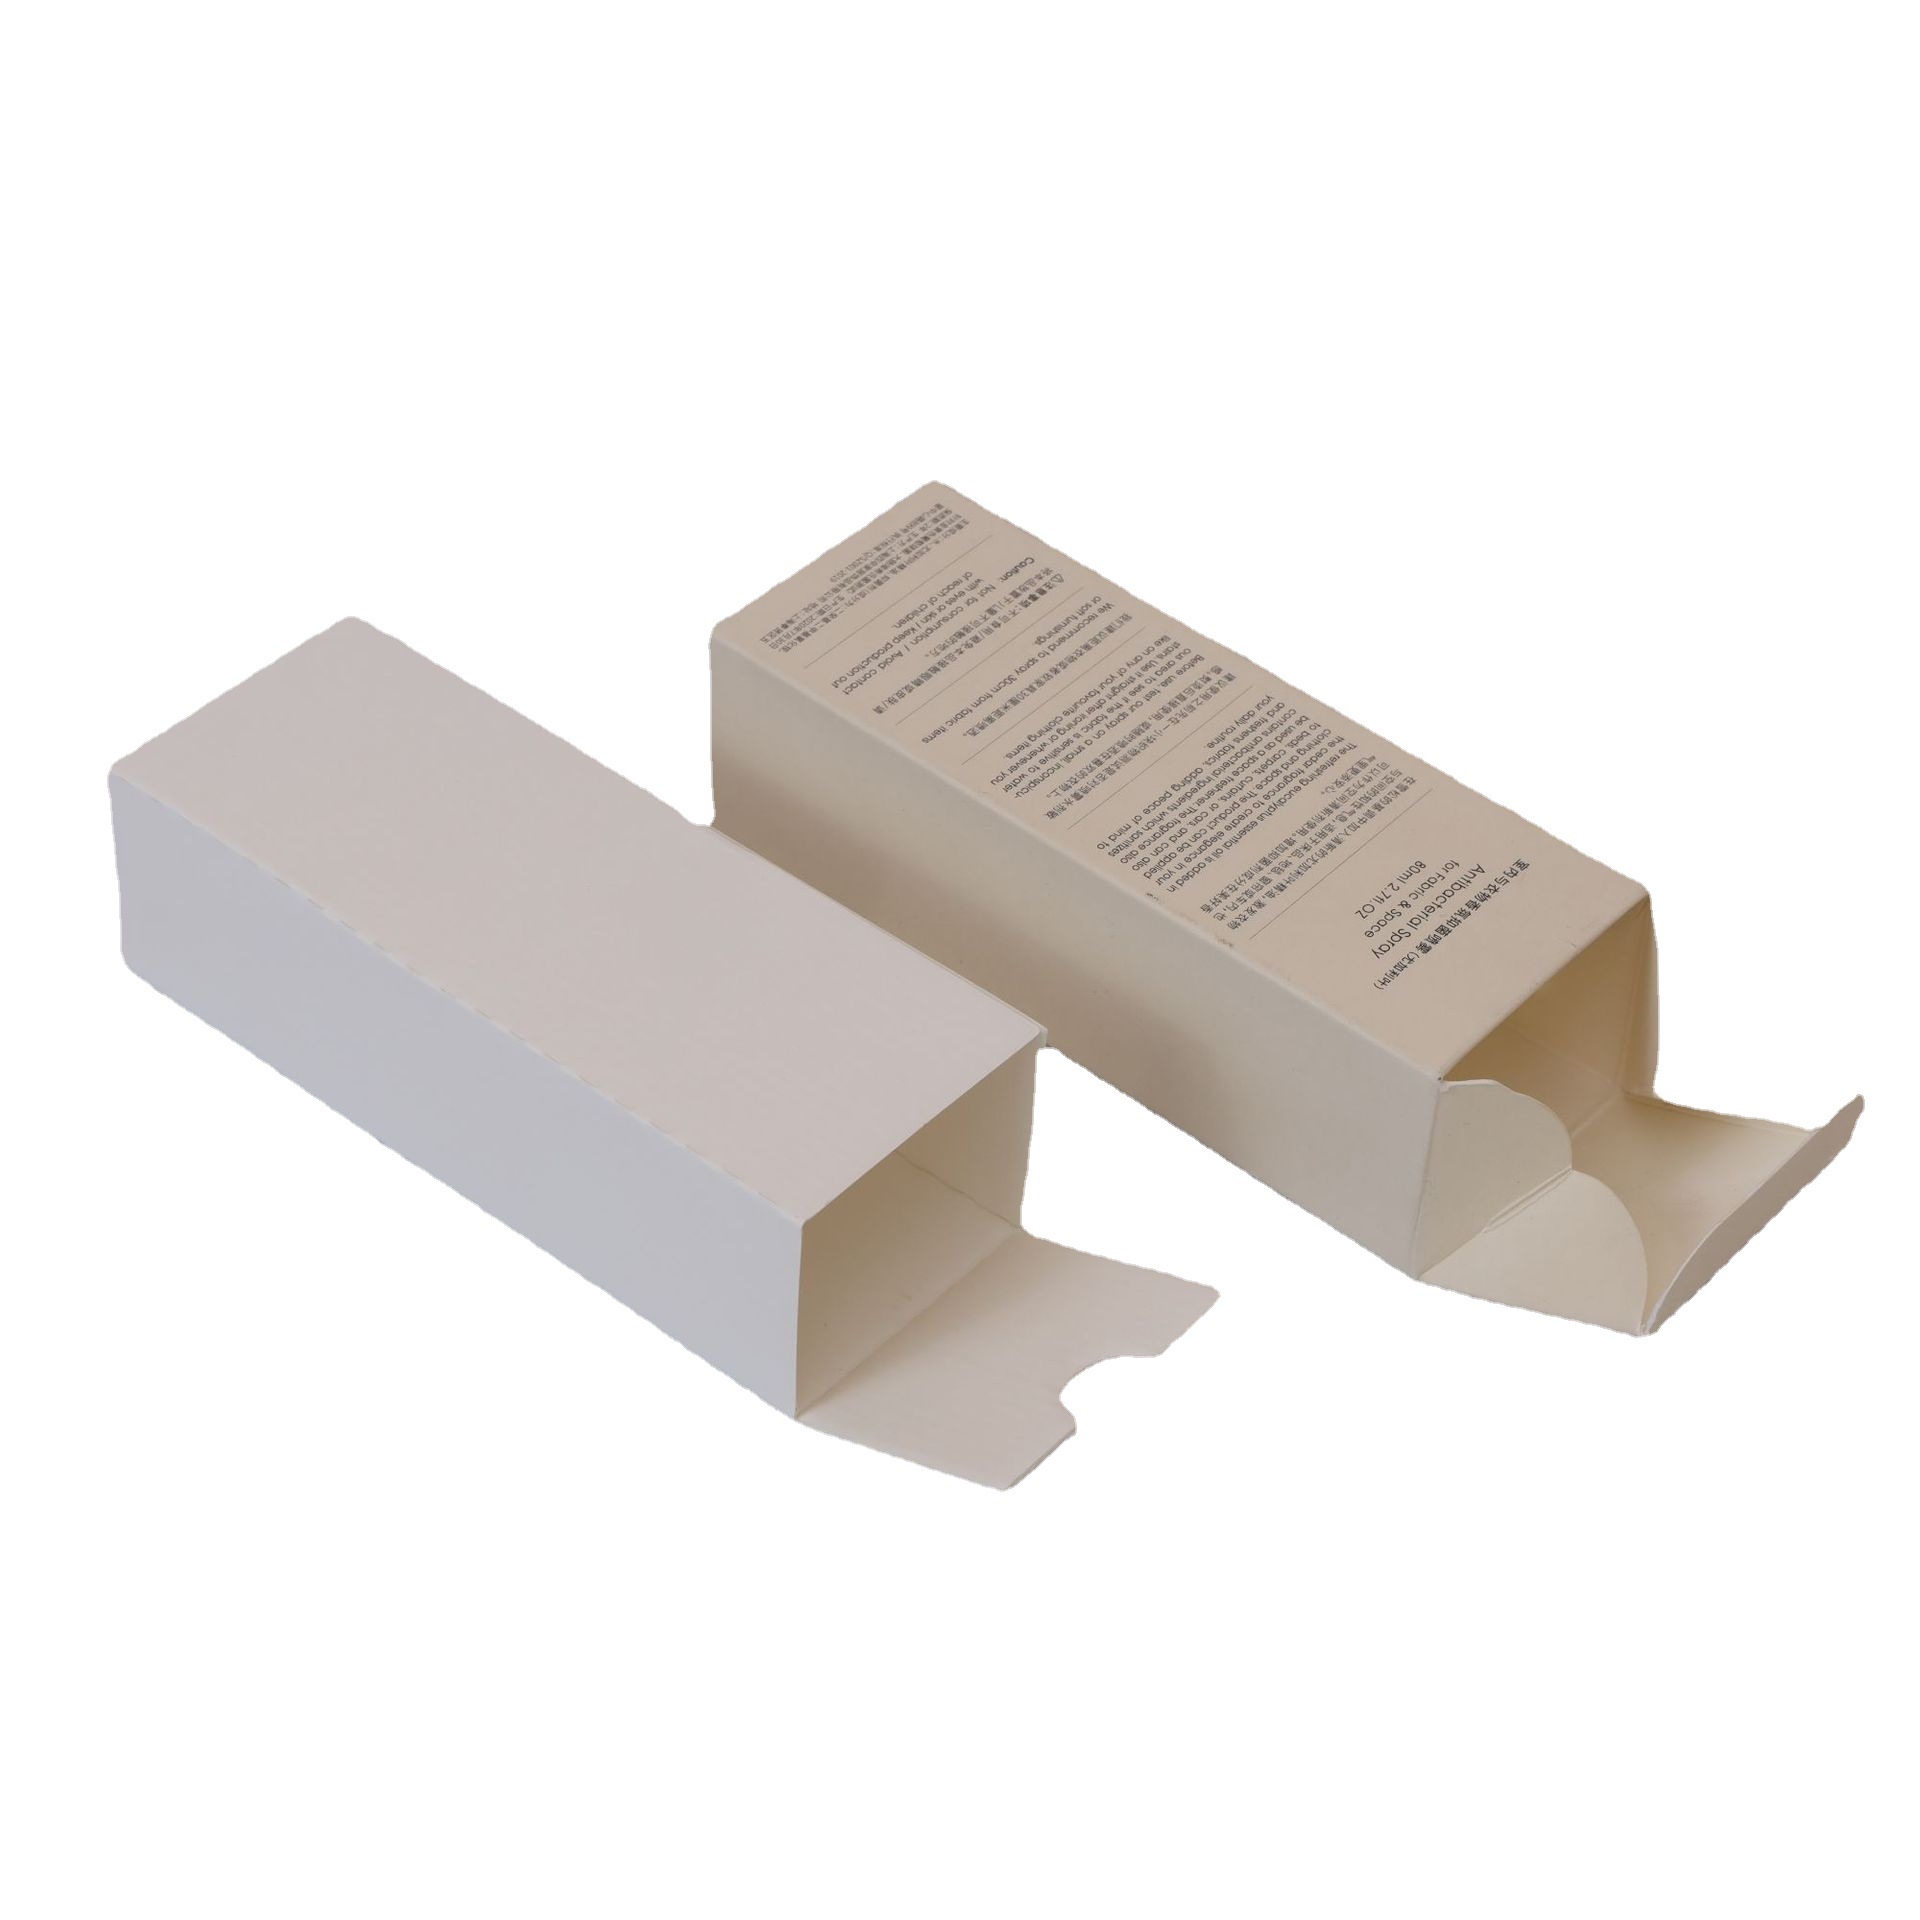 White card mask box cosmetic packaging box folding can be printed logo skincare colour box